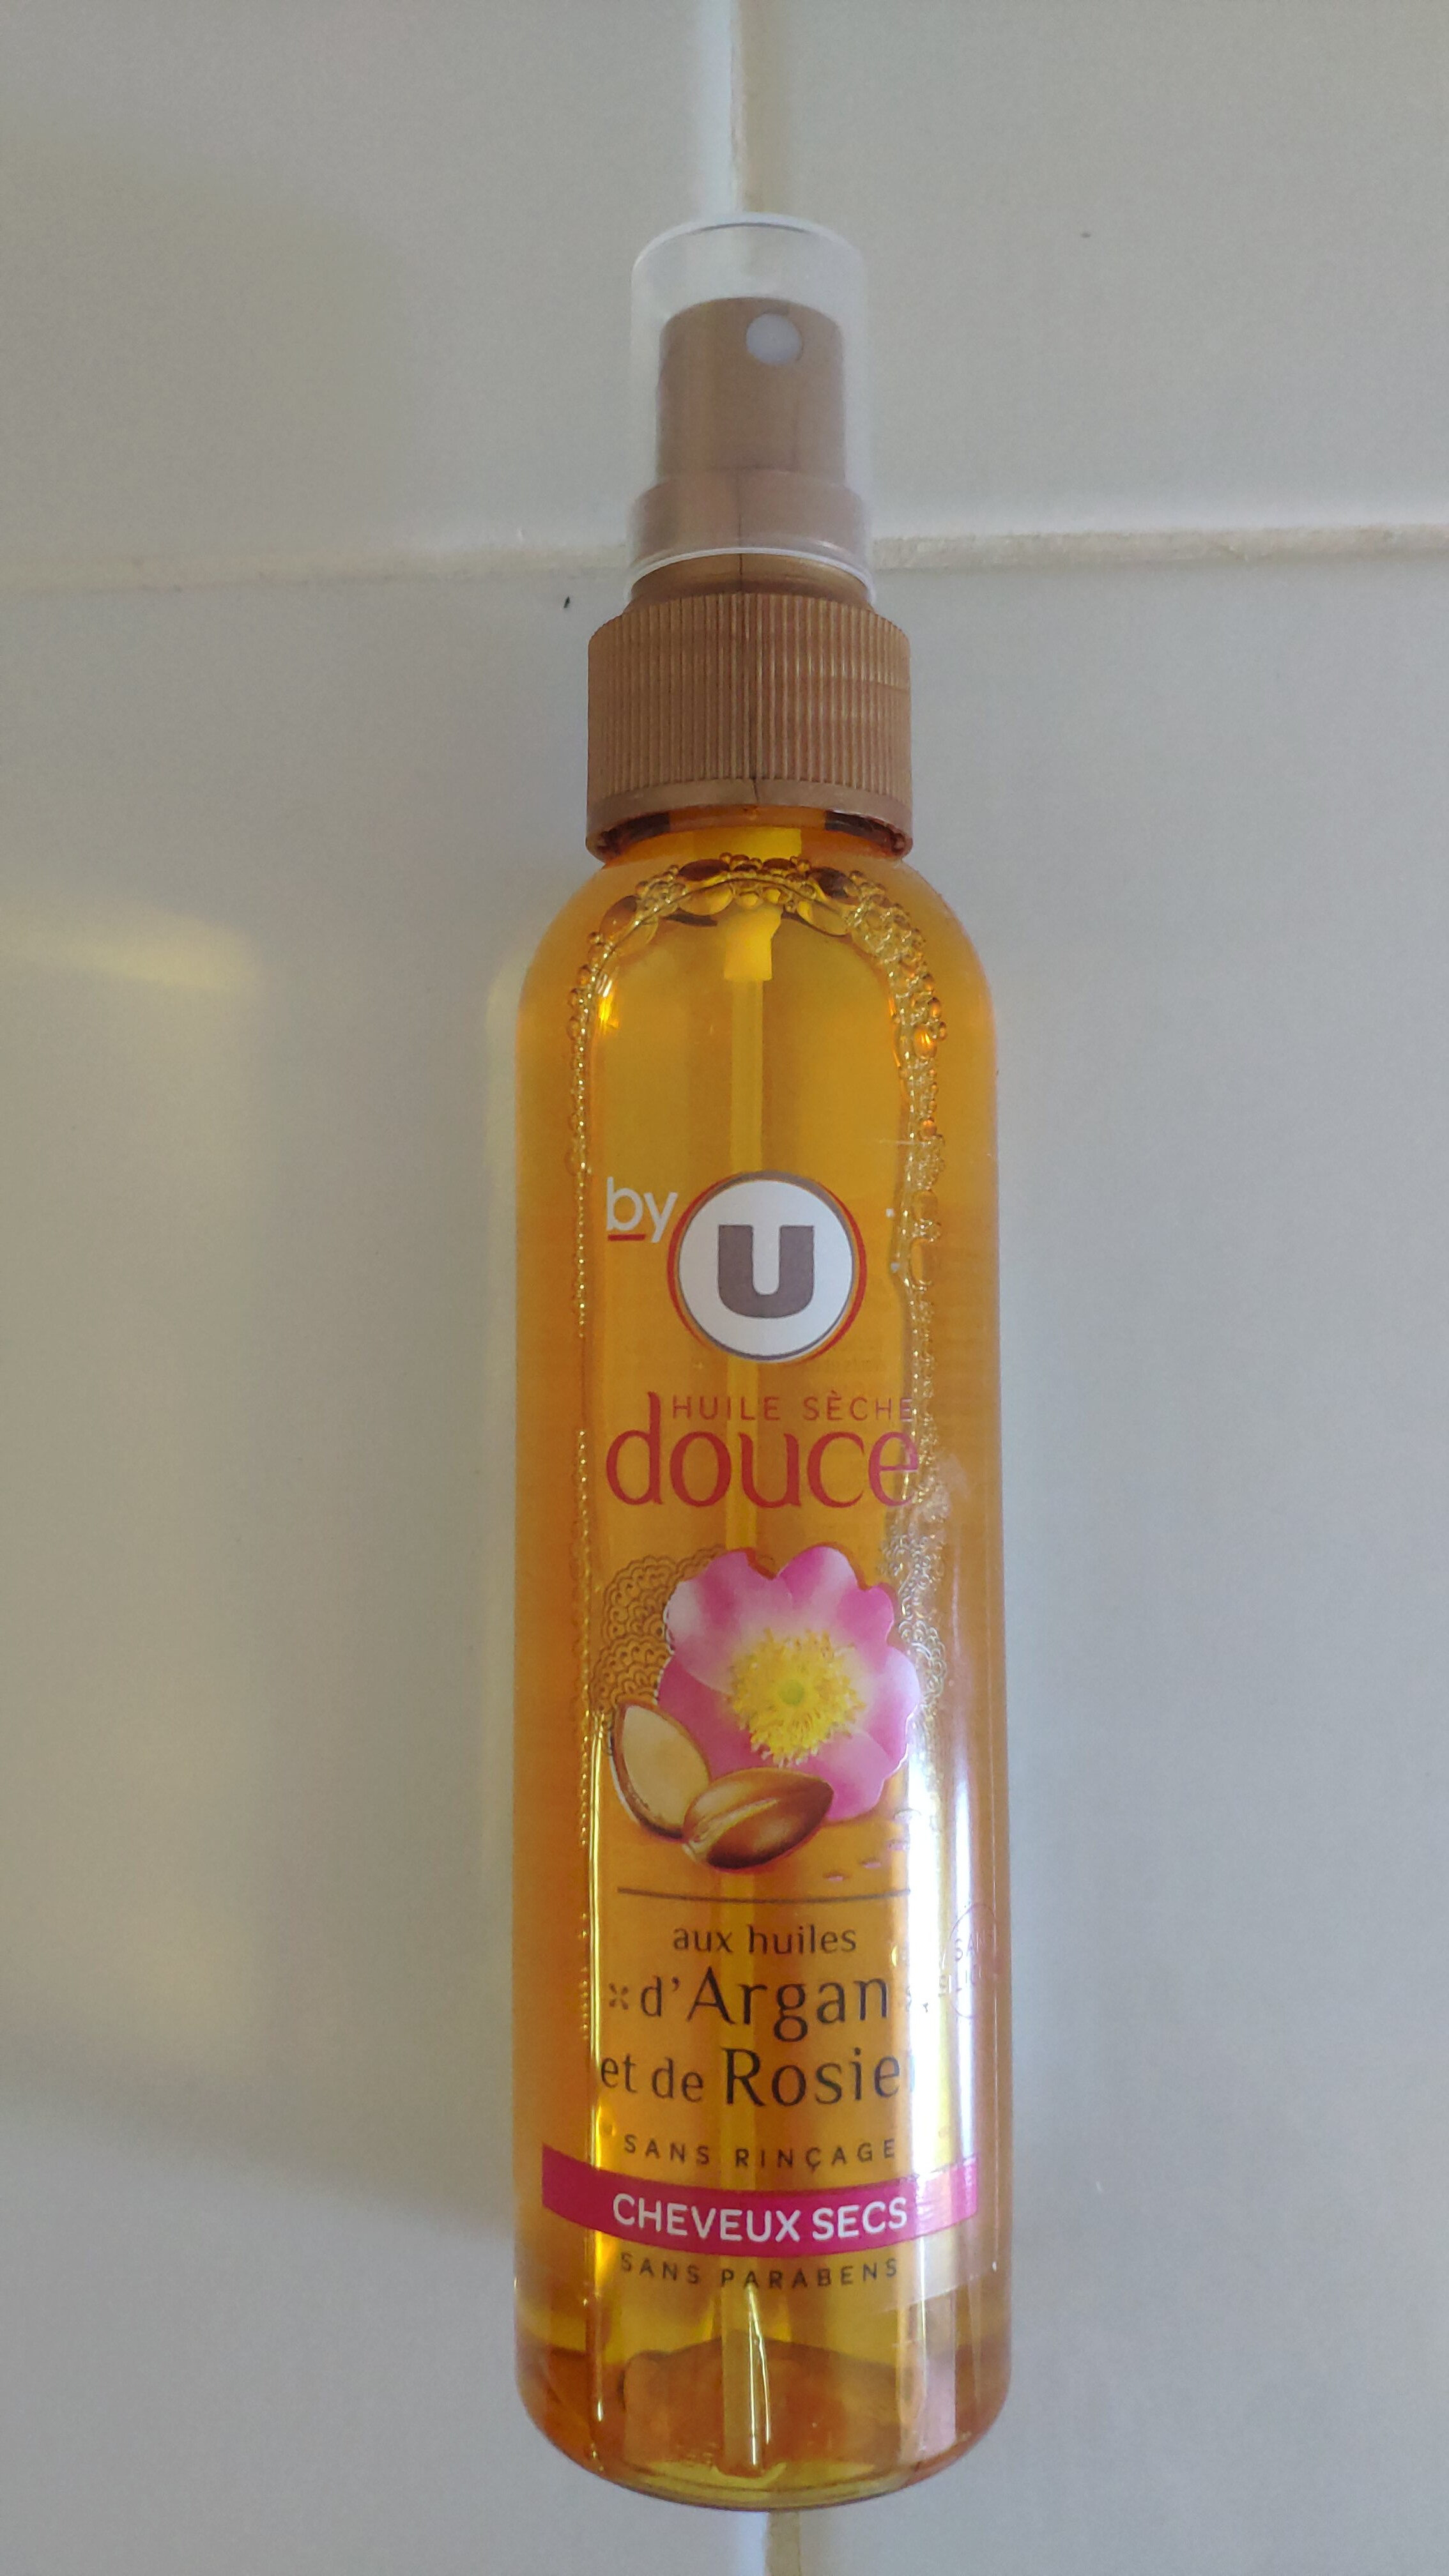 Huile sèche douce by U - Product - fr